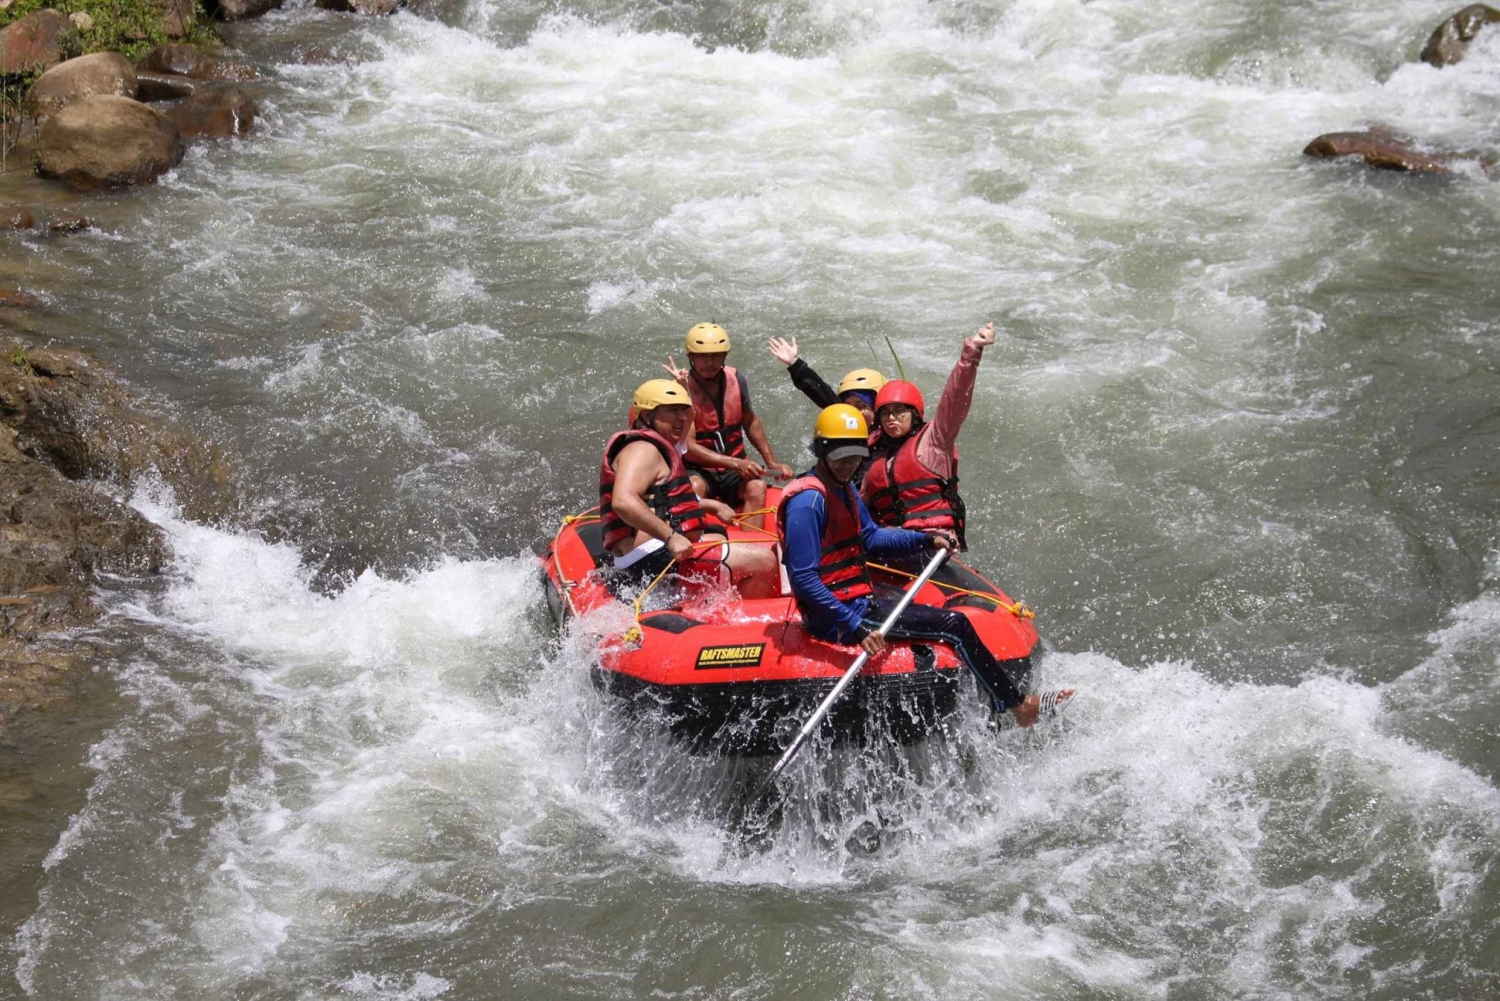 Pa Tong: Rainforest Day Trip with Cave, Rafting, ATV & Lunch